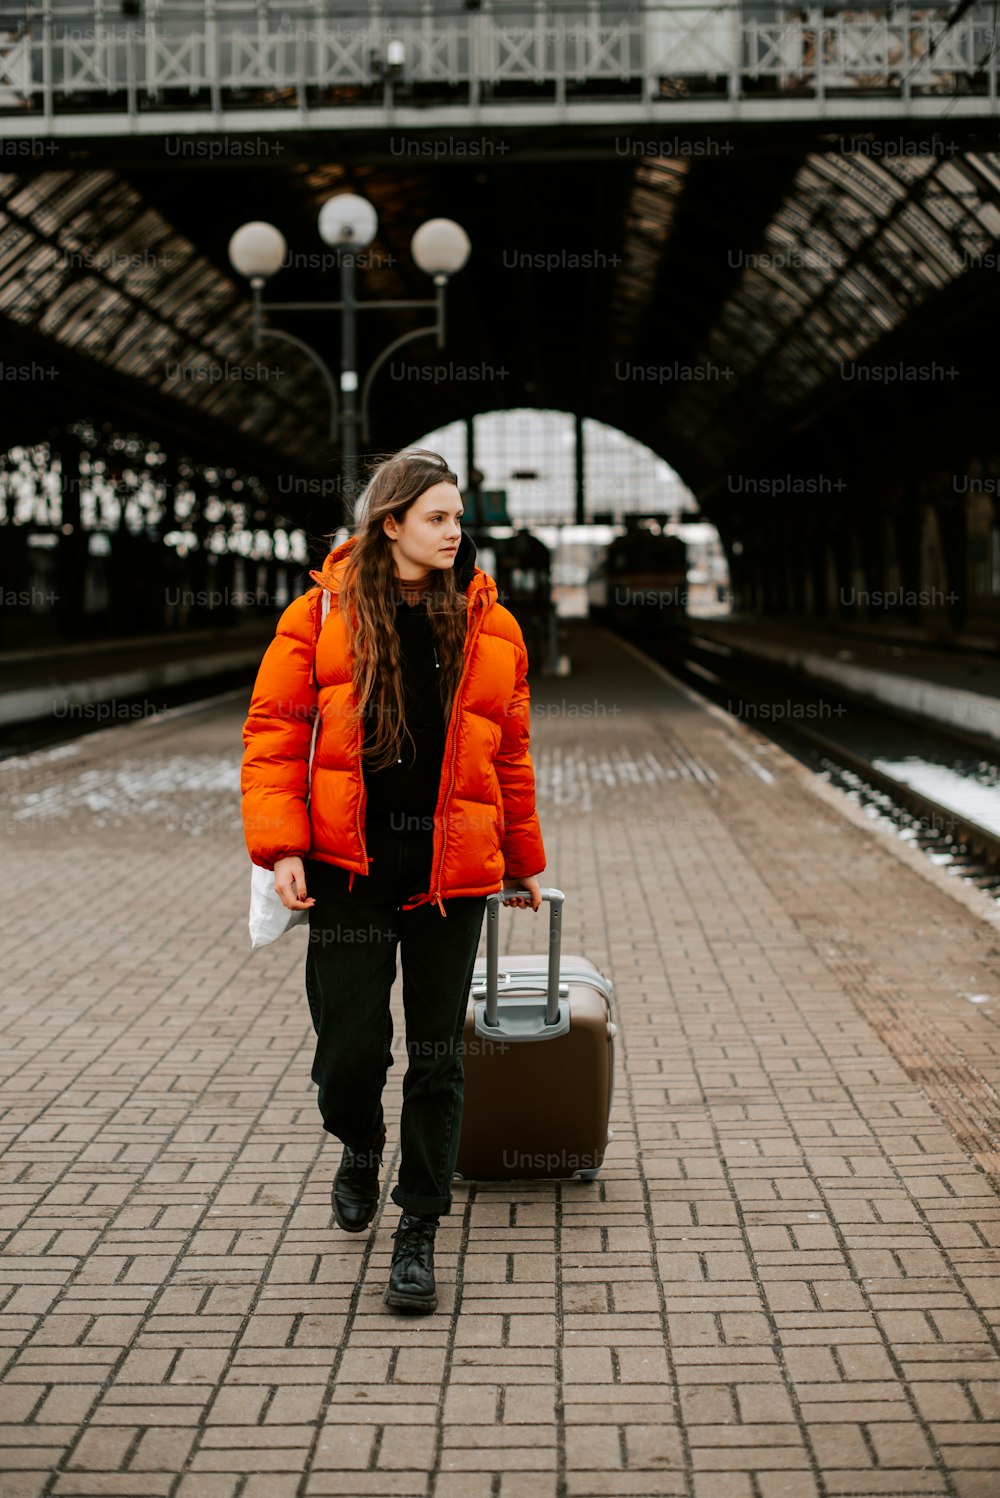 a woman in an orange jacket carrying a suitcase